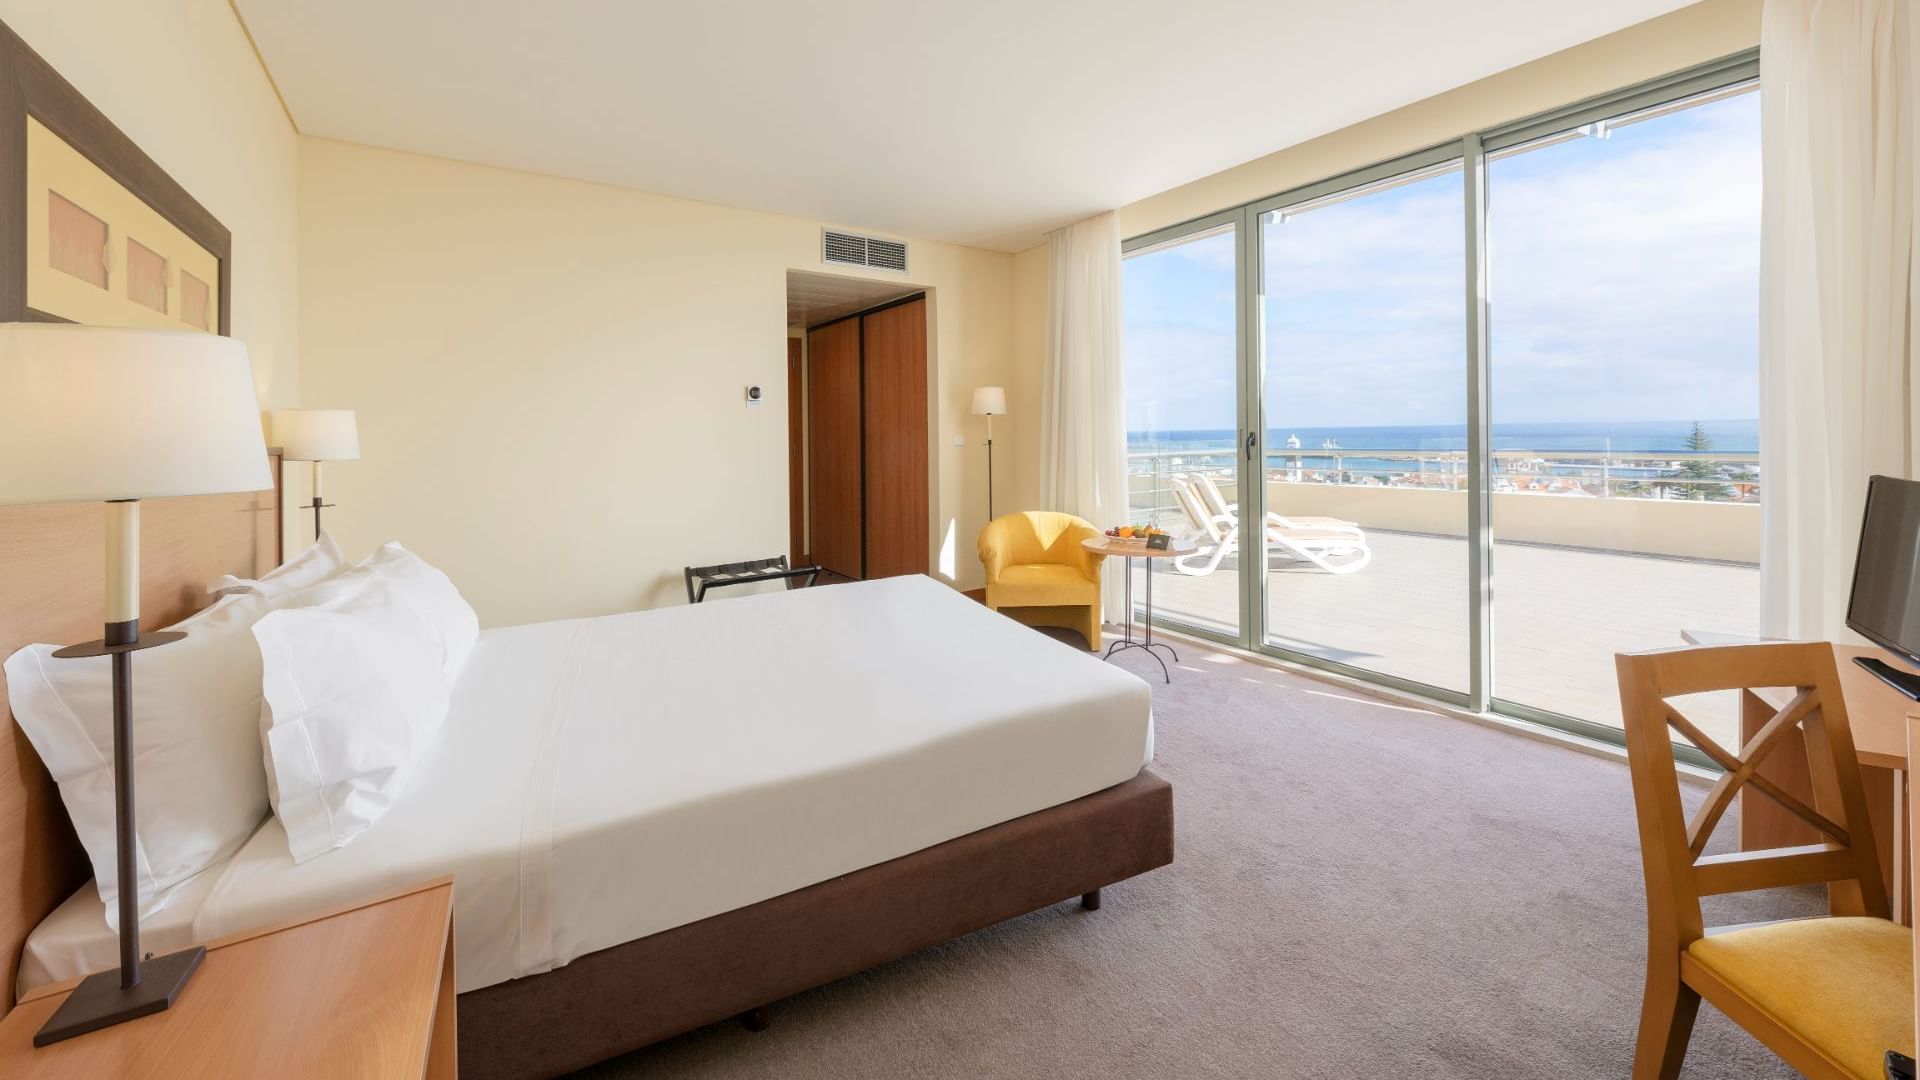 Bed facing the sea in Standards Plus Room at Bensaude Hotels